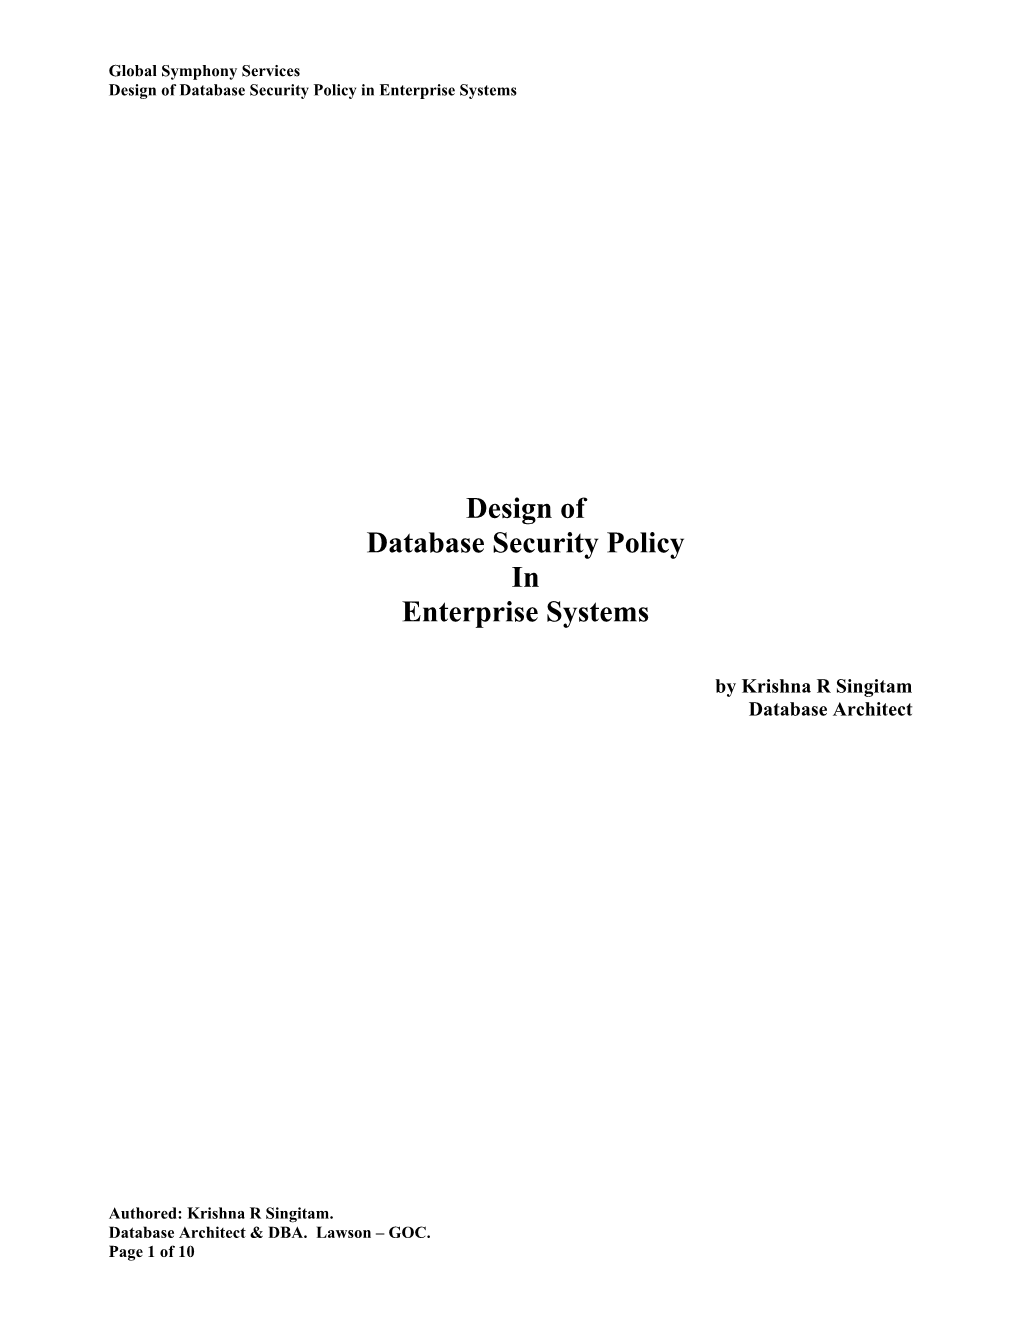 Design and Implement Database Security Policies in an Enterprise